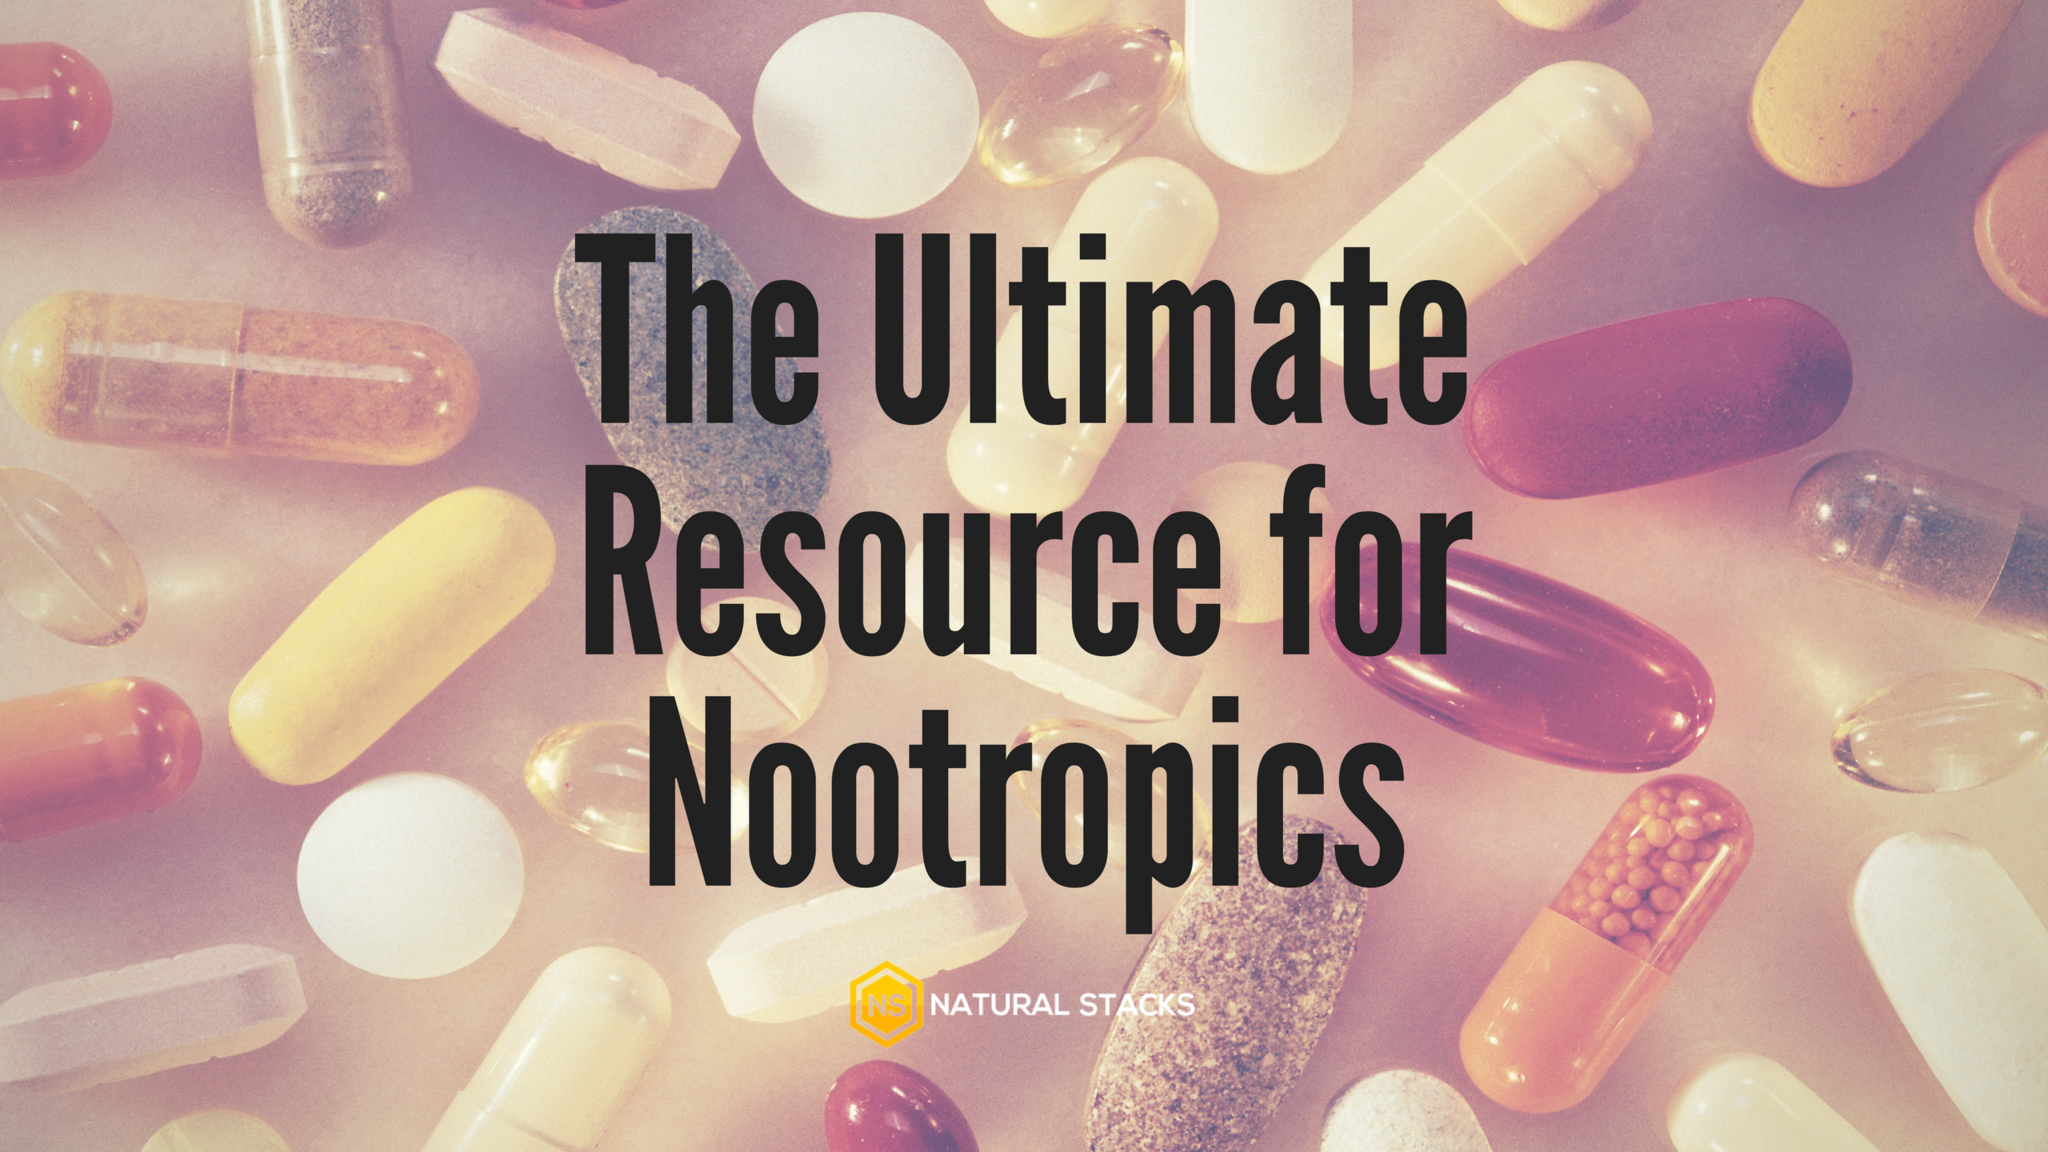 The Ultimate Resource for Nootropics